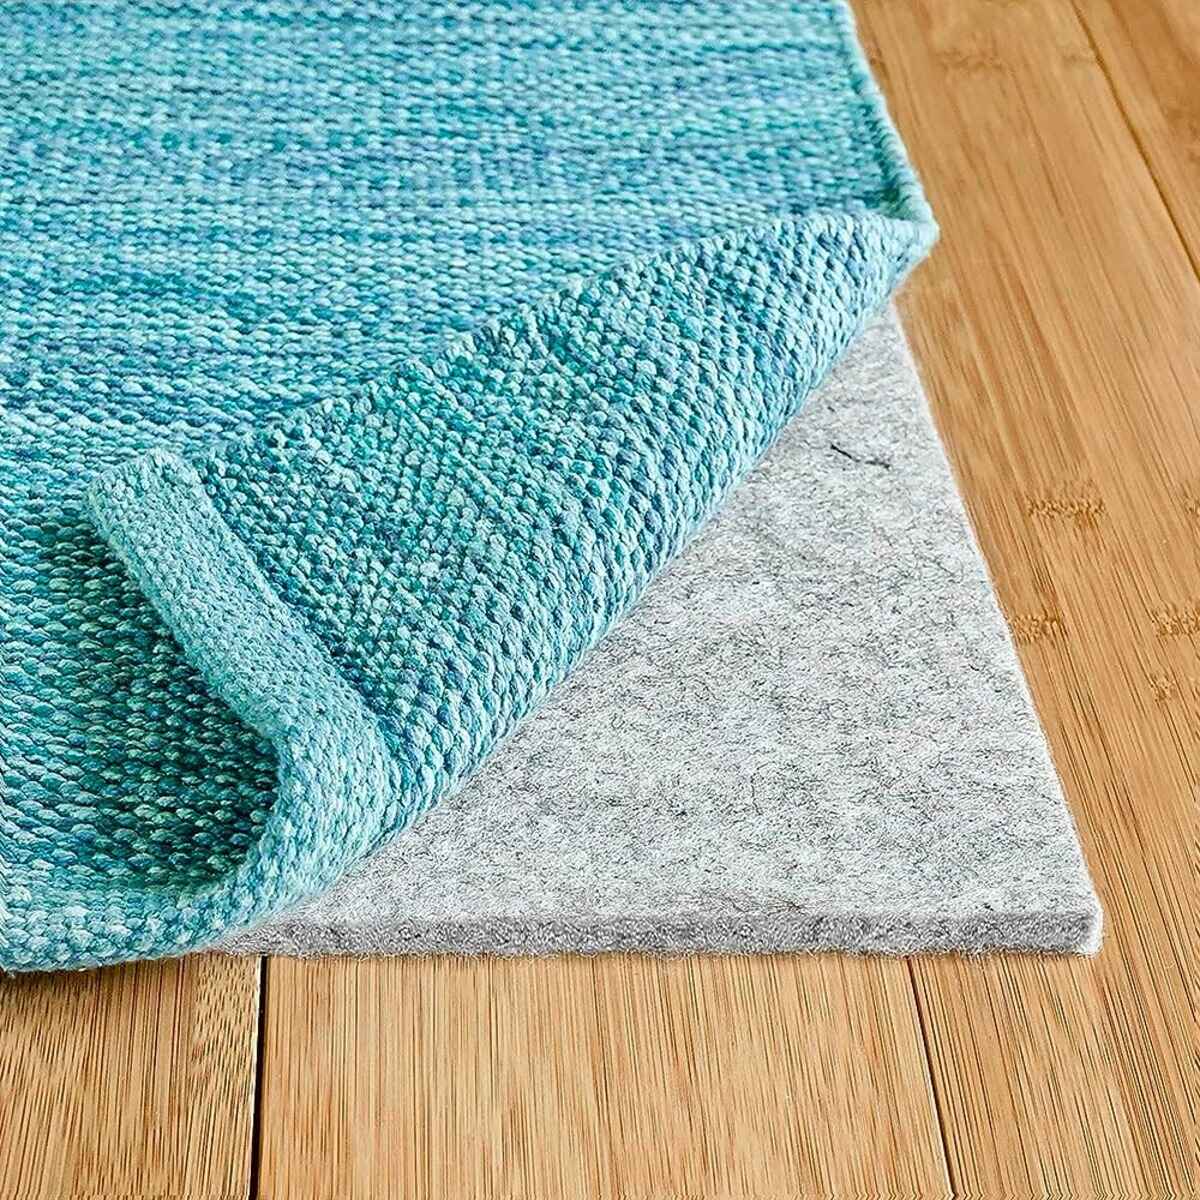 Rugs.com - 4' x 6' Everyday Performance Rug Pad 1/4 Thick Felt & Non-Slip  Backing Perfect for Any Flooring Surface